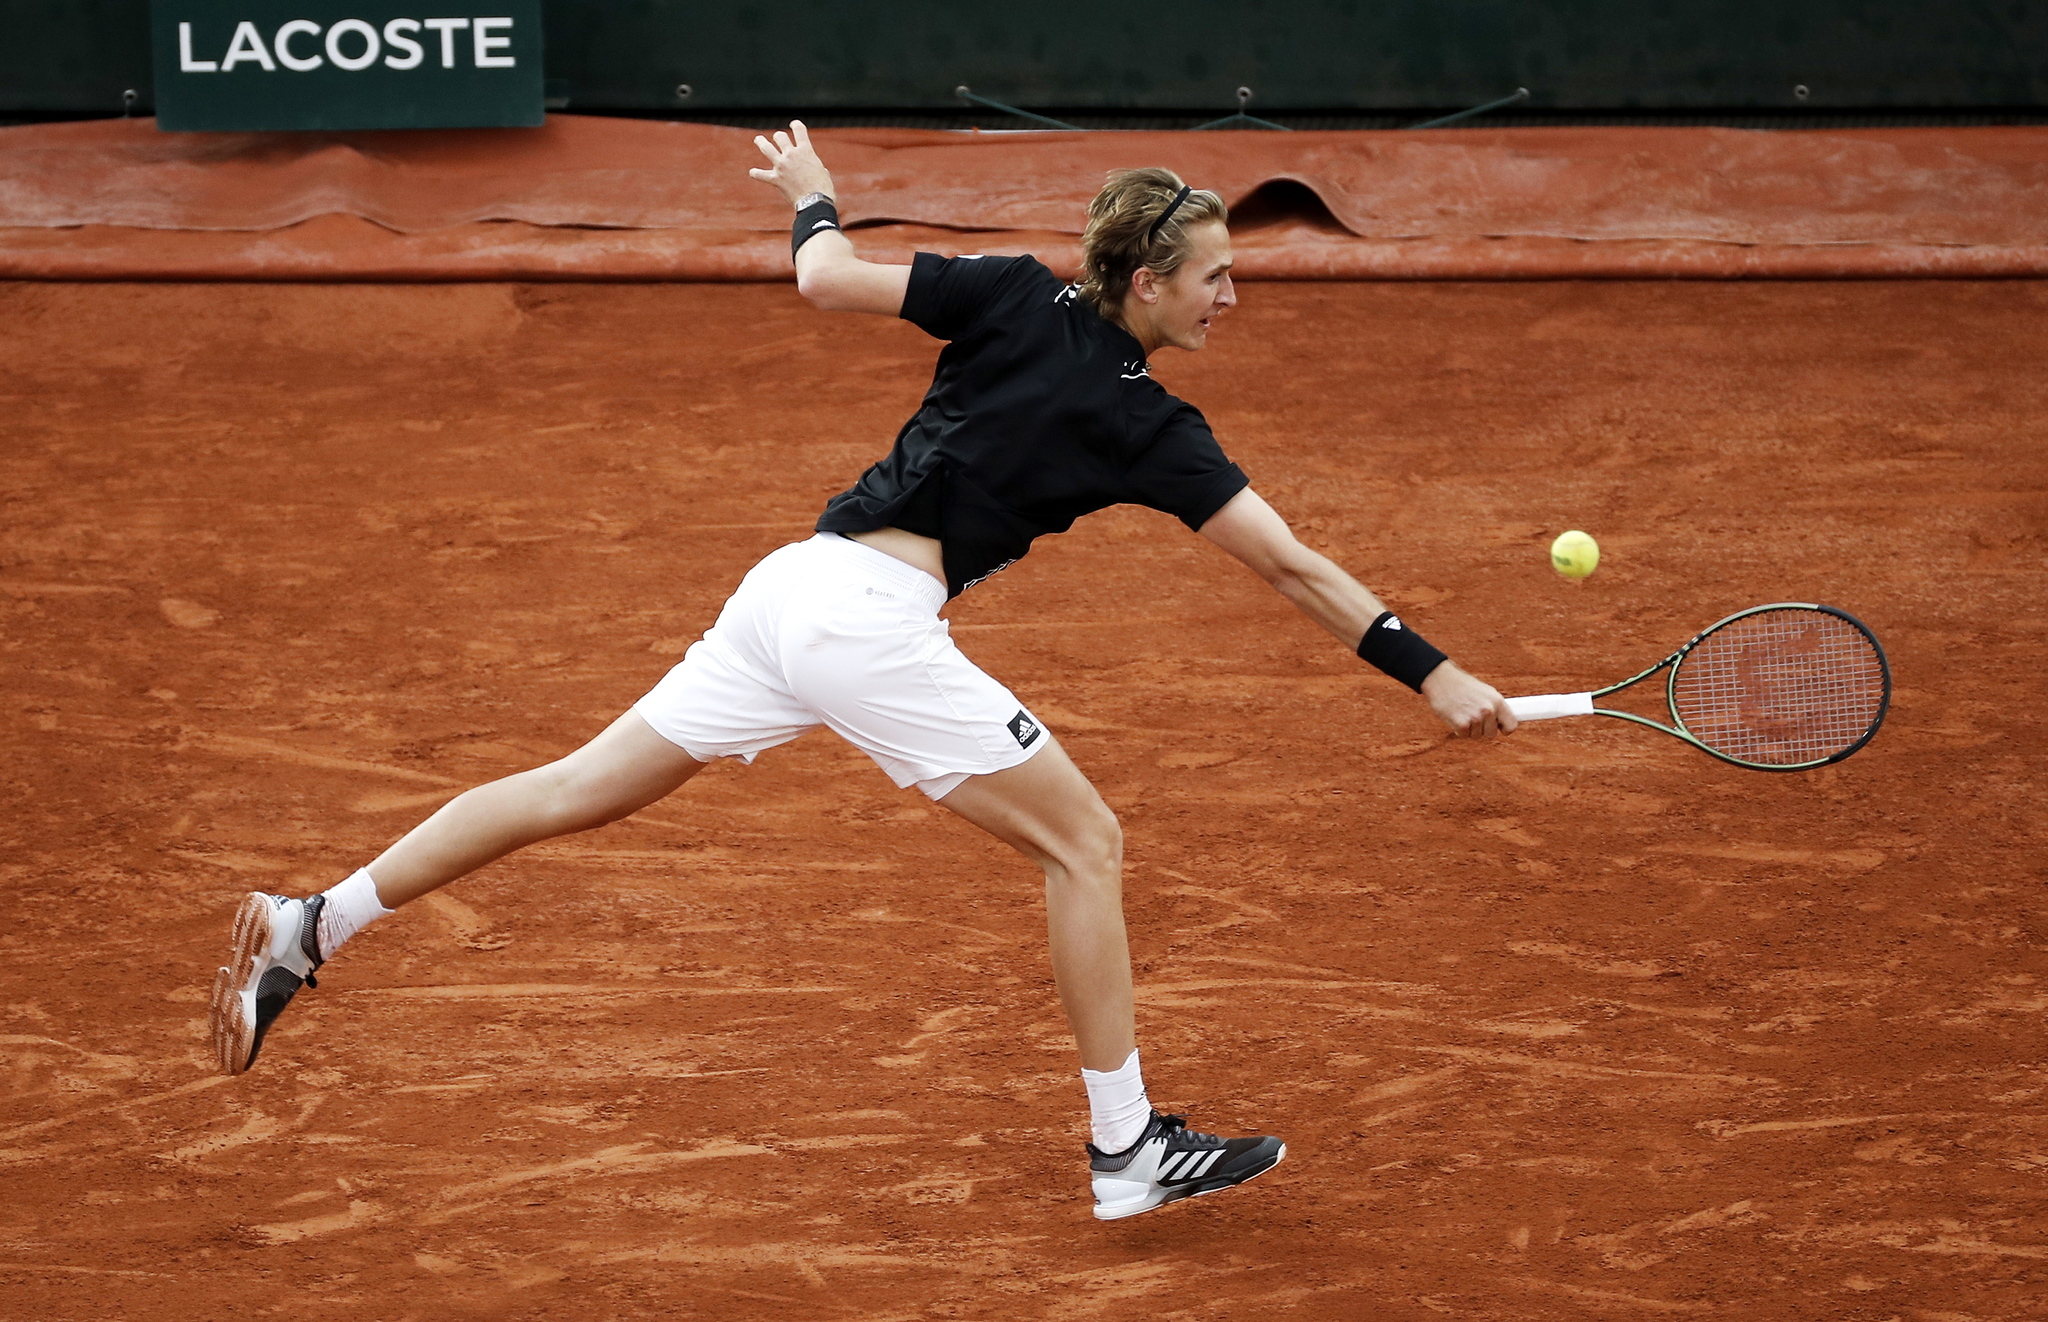 Paris (France), 25/05/2022.- Sebastian  lt;HIT gt;Korda lt;/HIT gt; of the US plays a backhand in the men's second round match against Richard Gasquet of France during the French Open tennis tournament at Roland Garros in Paris, France, 25 May 2022. (Tenis, Abierto, Abierto, Francia) EFE/EPA/CHRISTOPHE PETIT TESSON